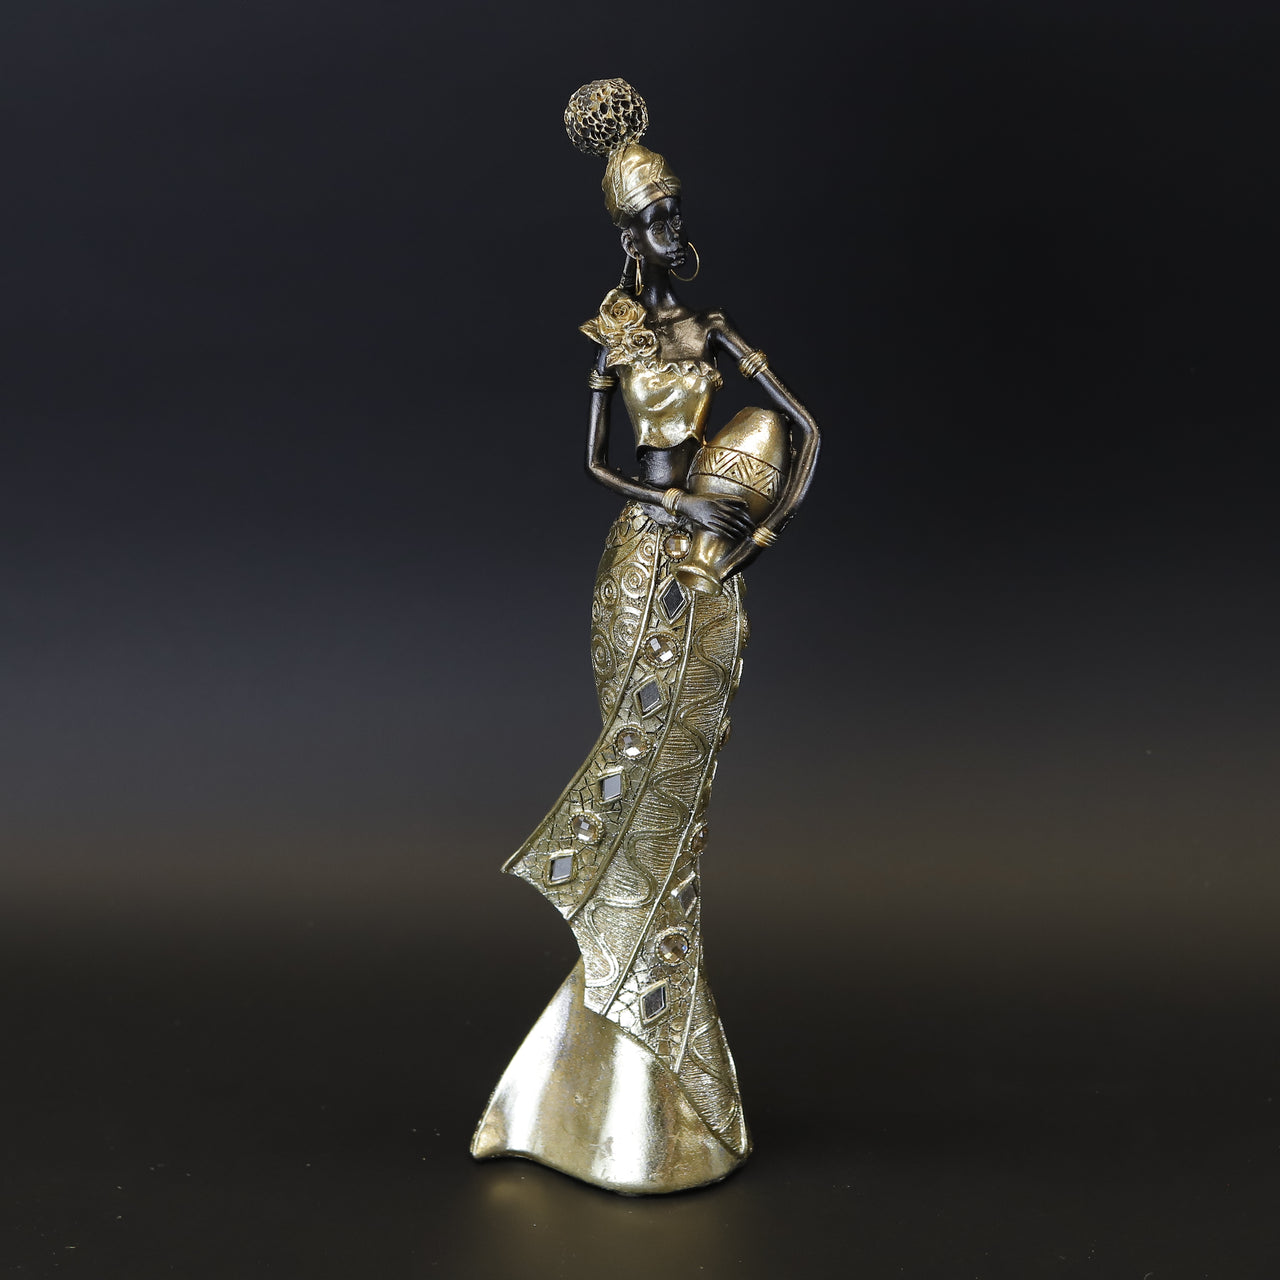 HCHD7760 - Gold Lady with Right Basket